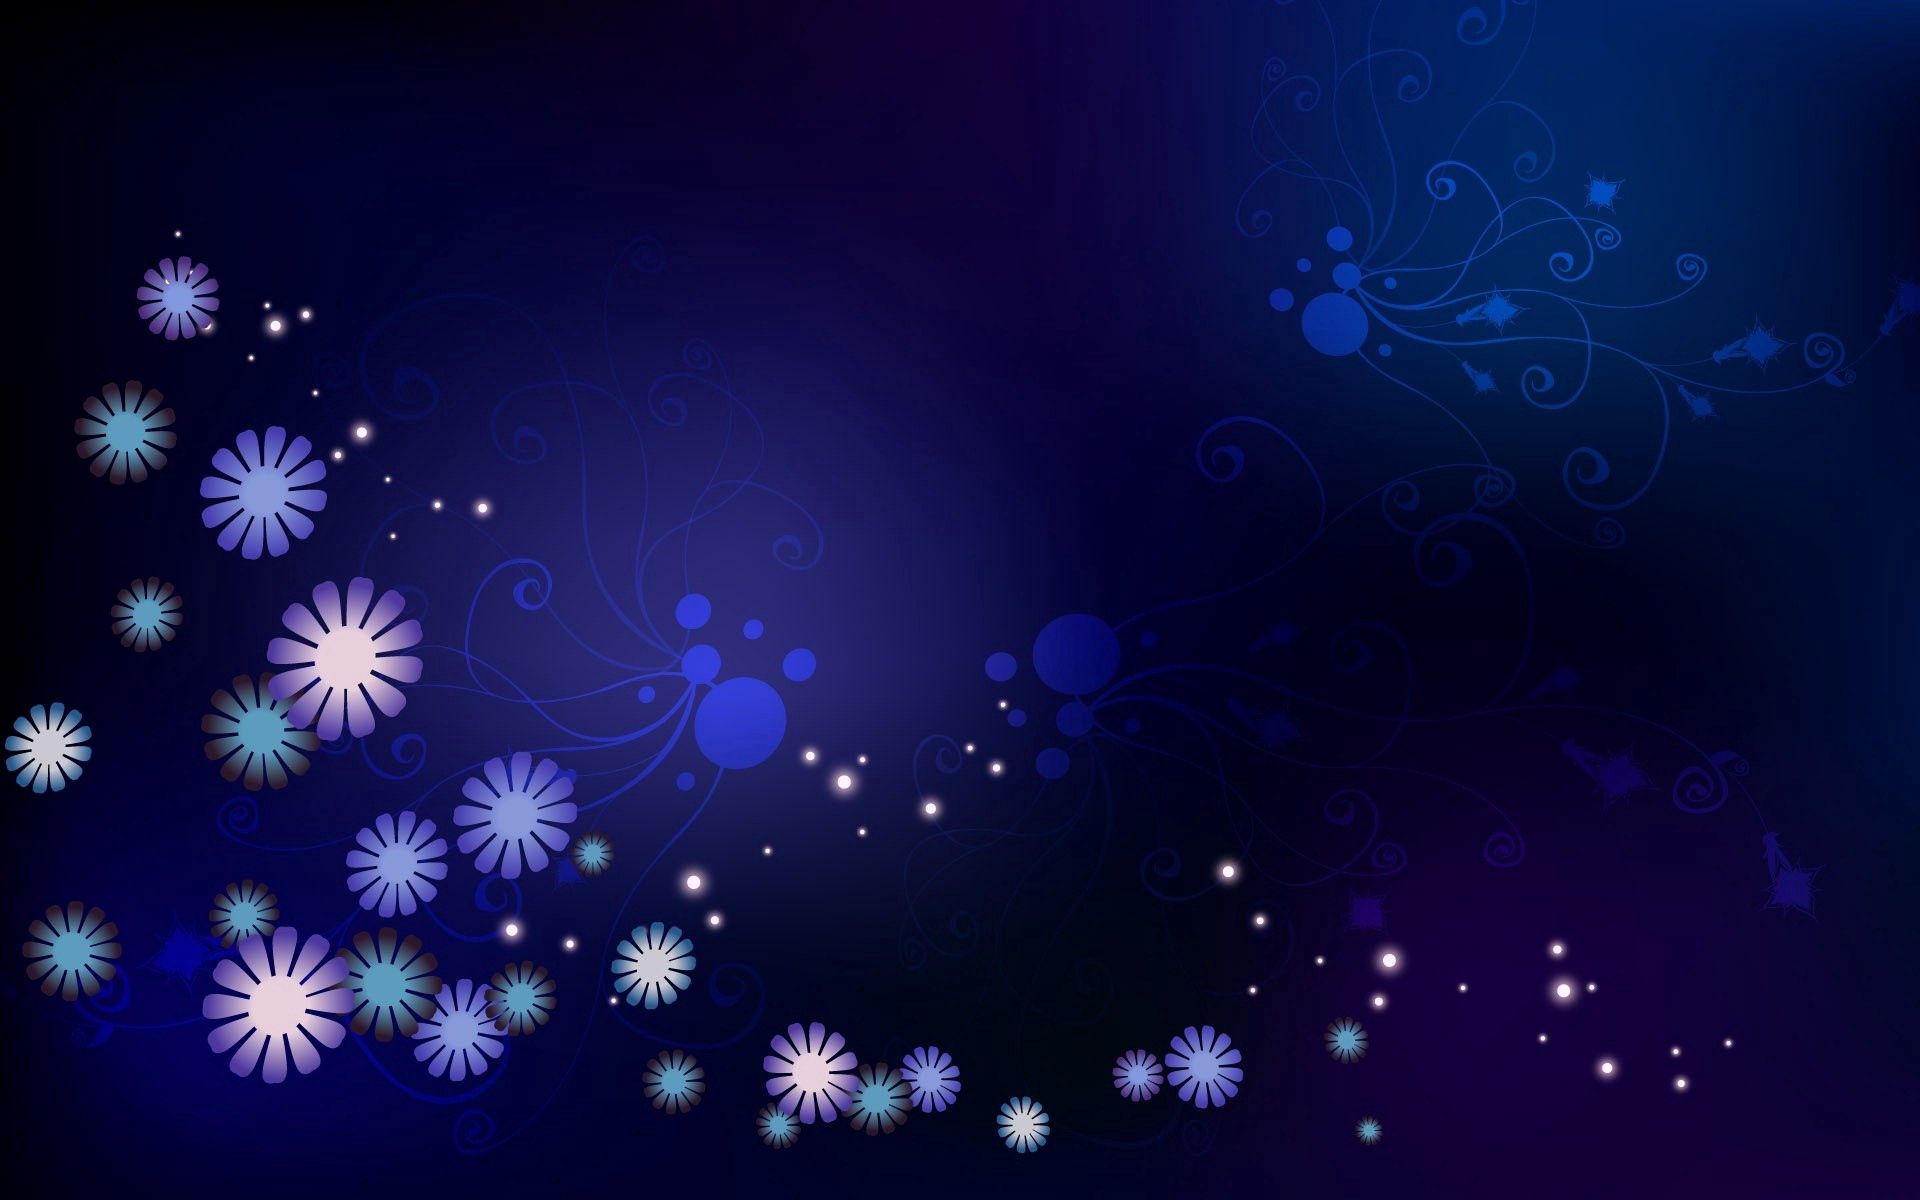 point, color, flowers, points, abstract, background, stars, circles, shine, light Full HD